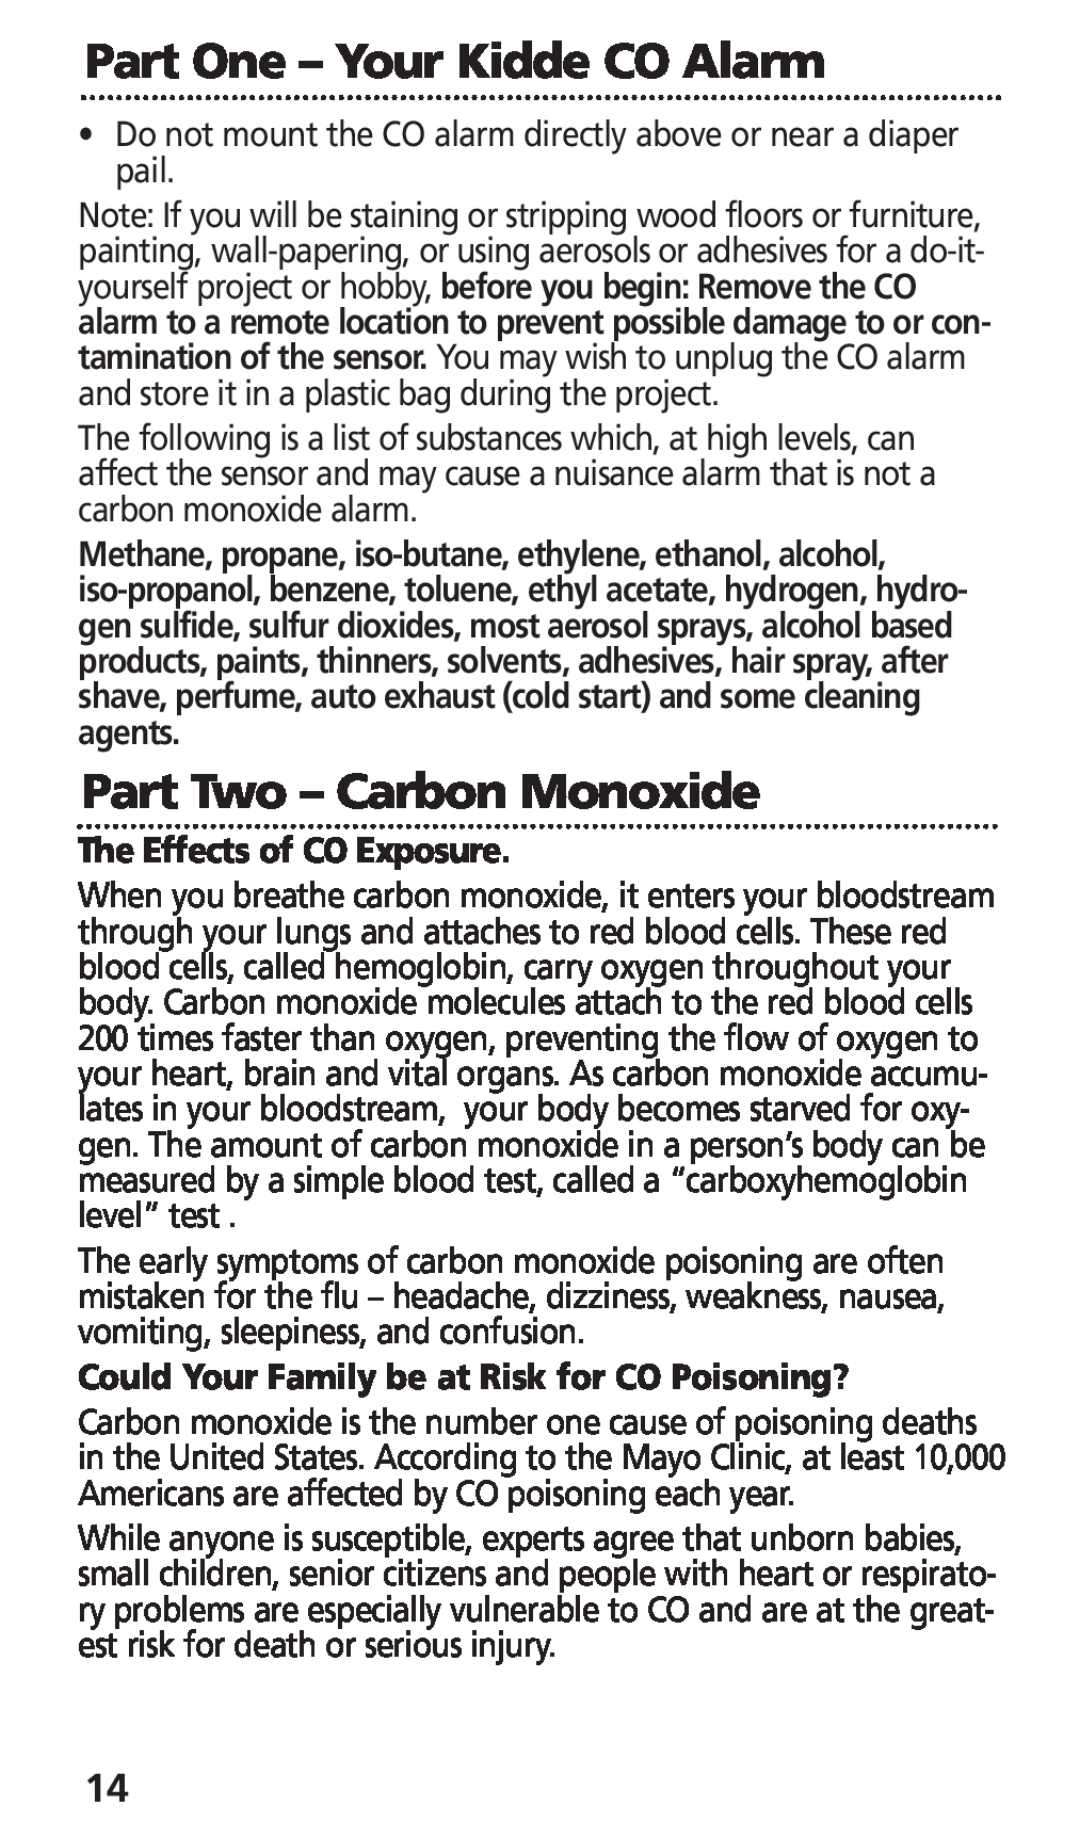 Kidde KN-COB-DP-H Part Two - Carbon Monoxide, The Effects of CO Exposure, Could Your Family be at Risk for CO Poisoning? 